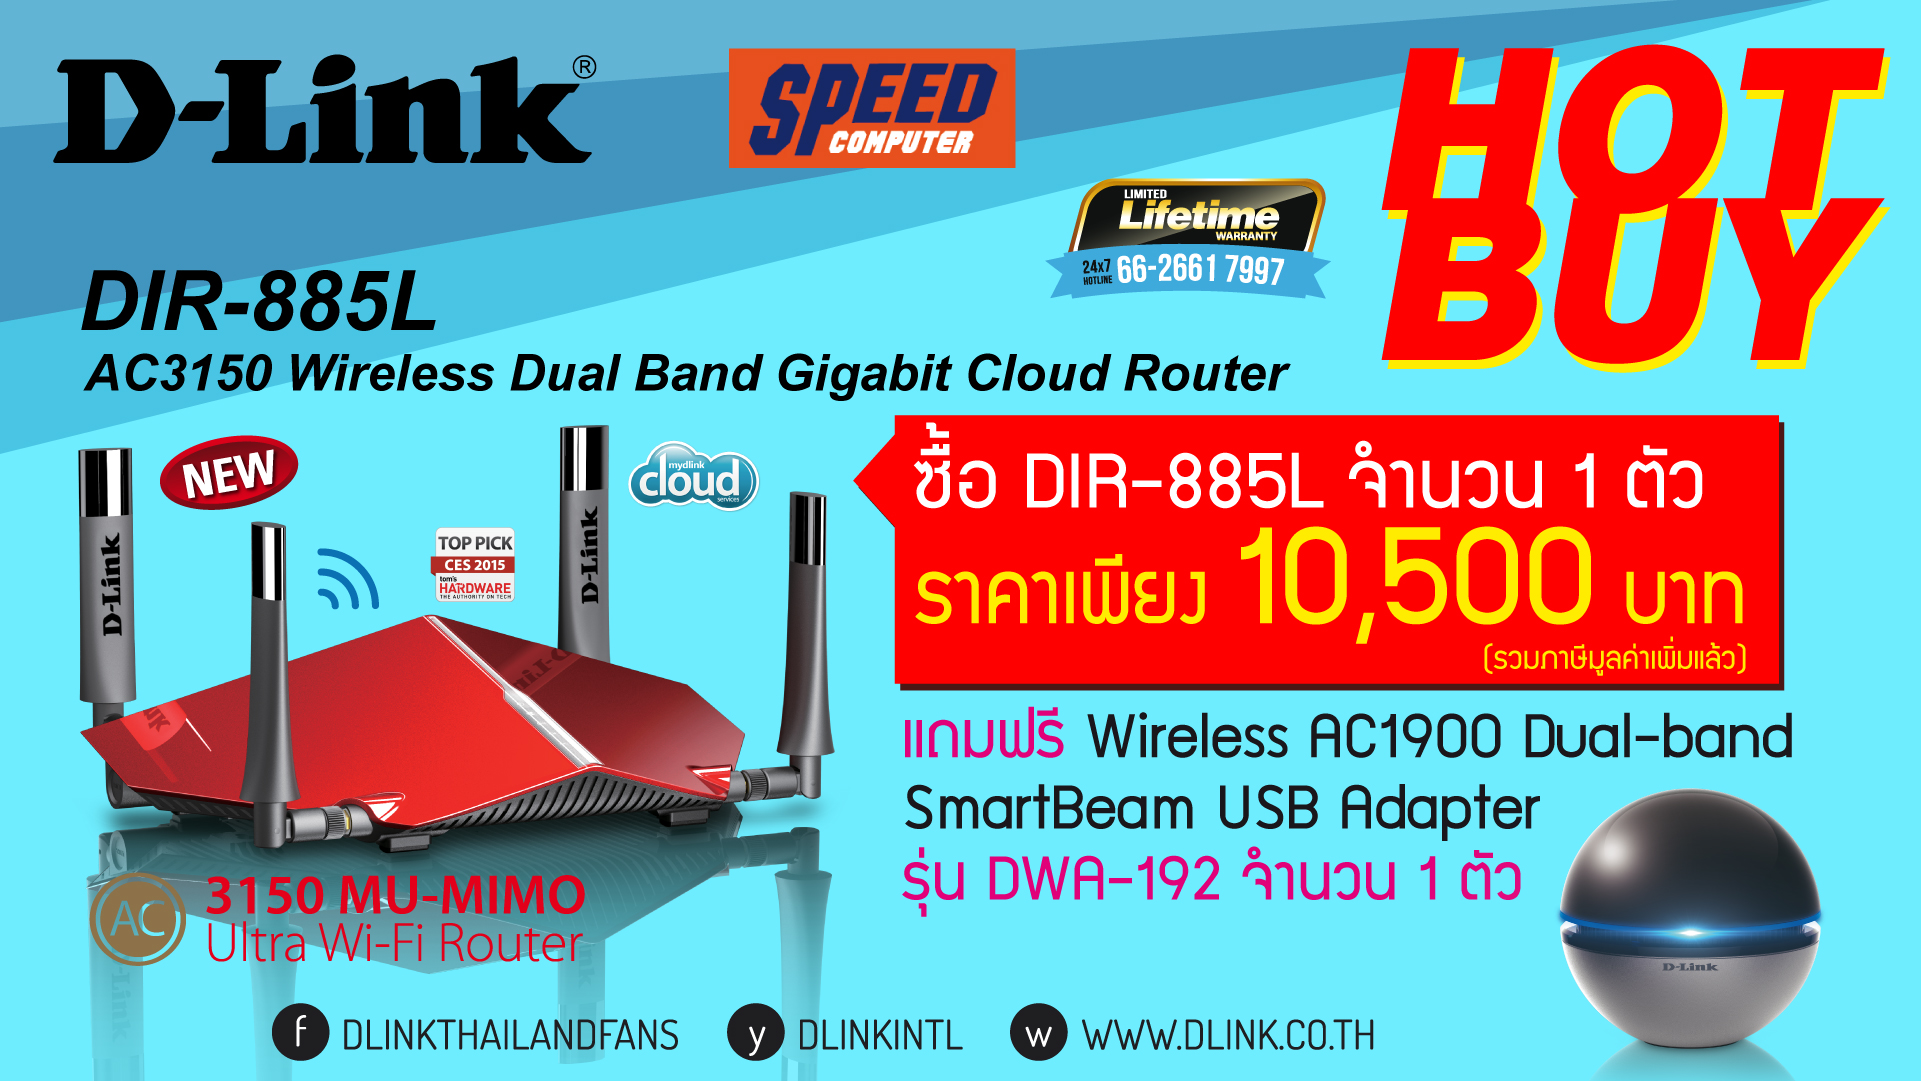 D-Link-Commart-Screen-for-Speed-March-16-10